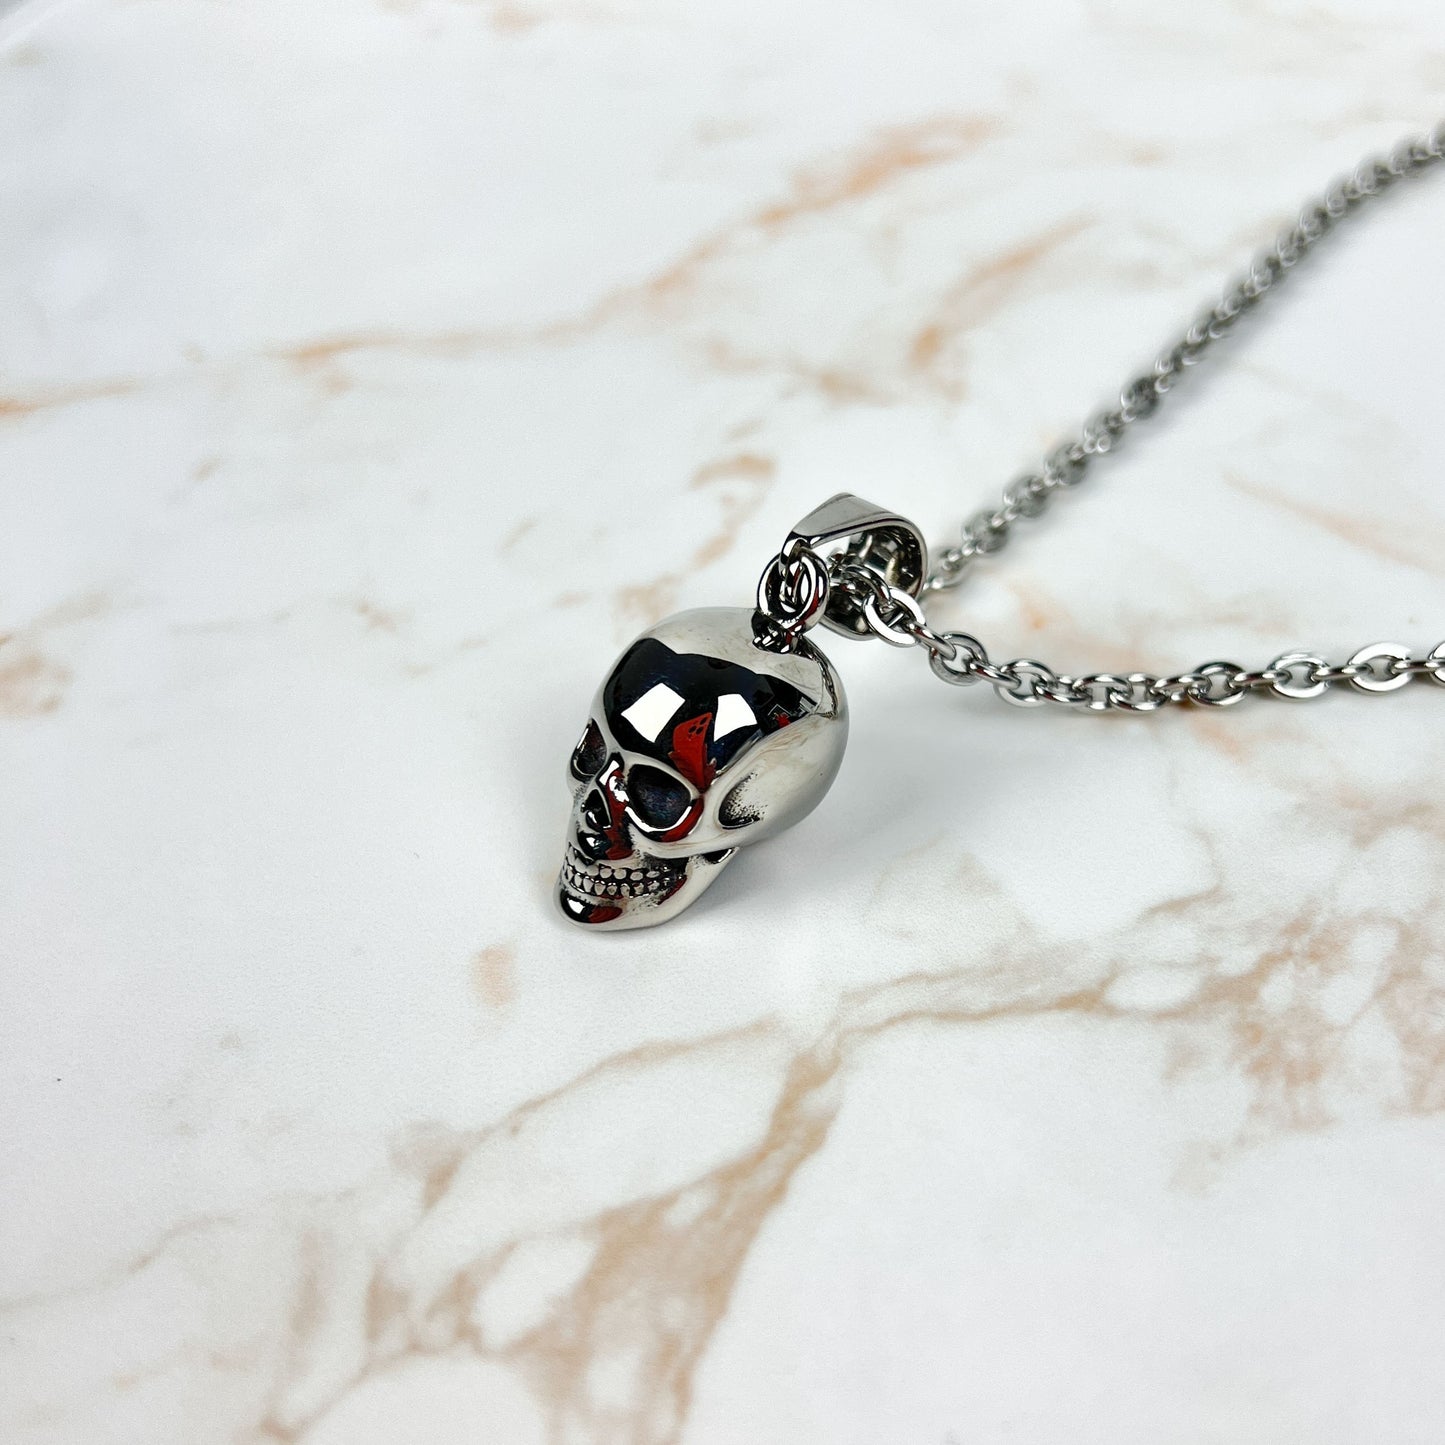 Stainless steel skull gothic necklace Baguette Magick